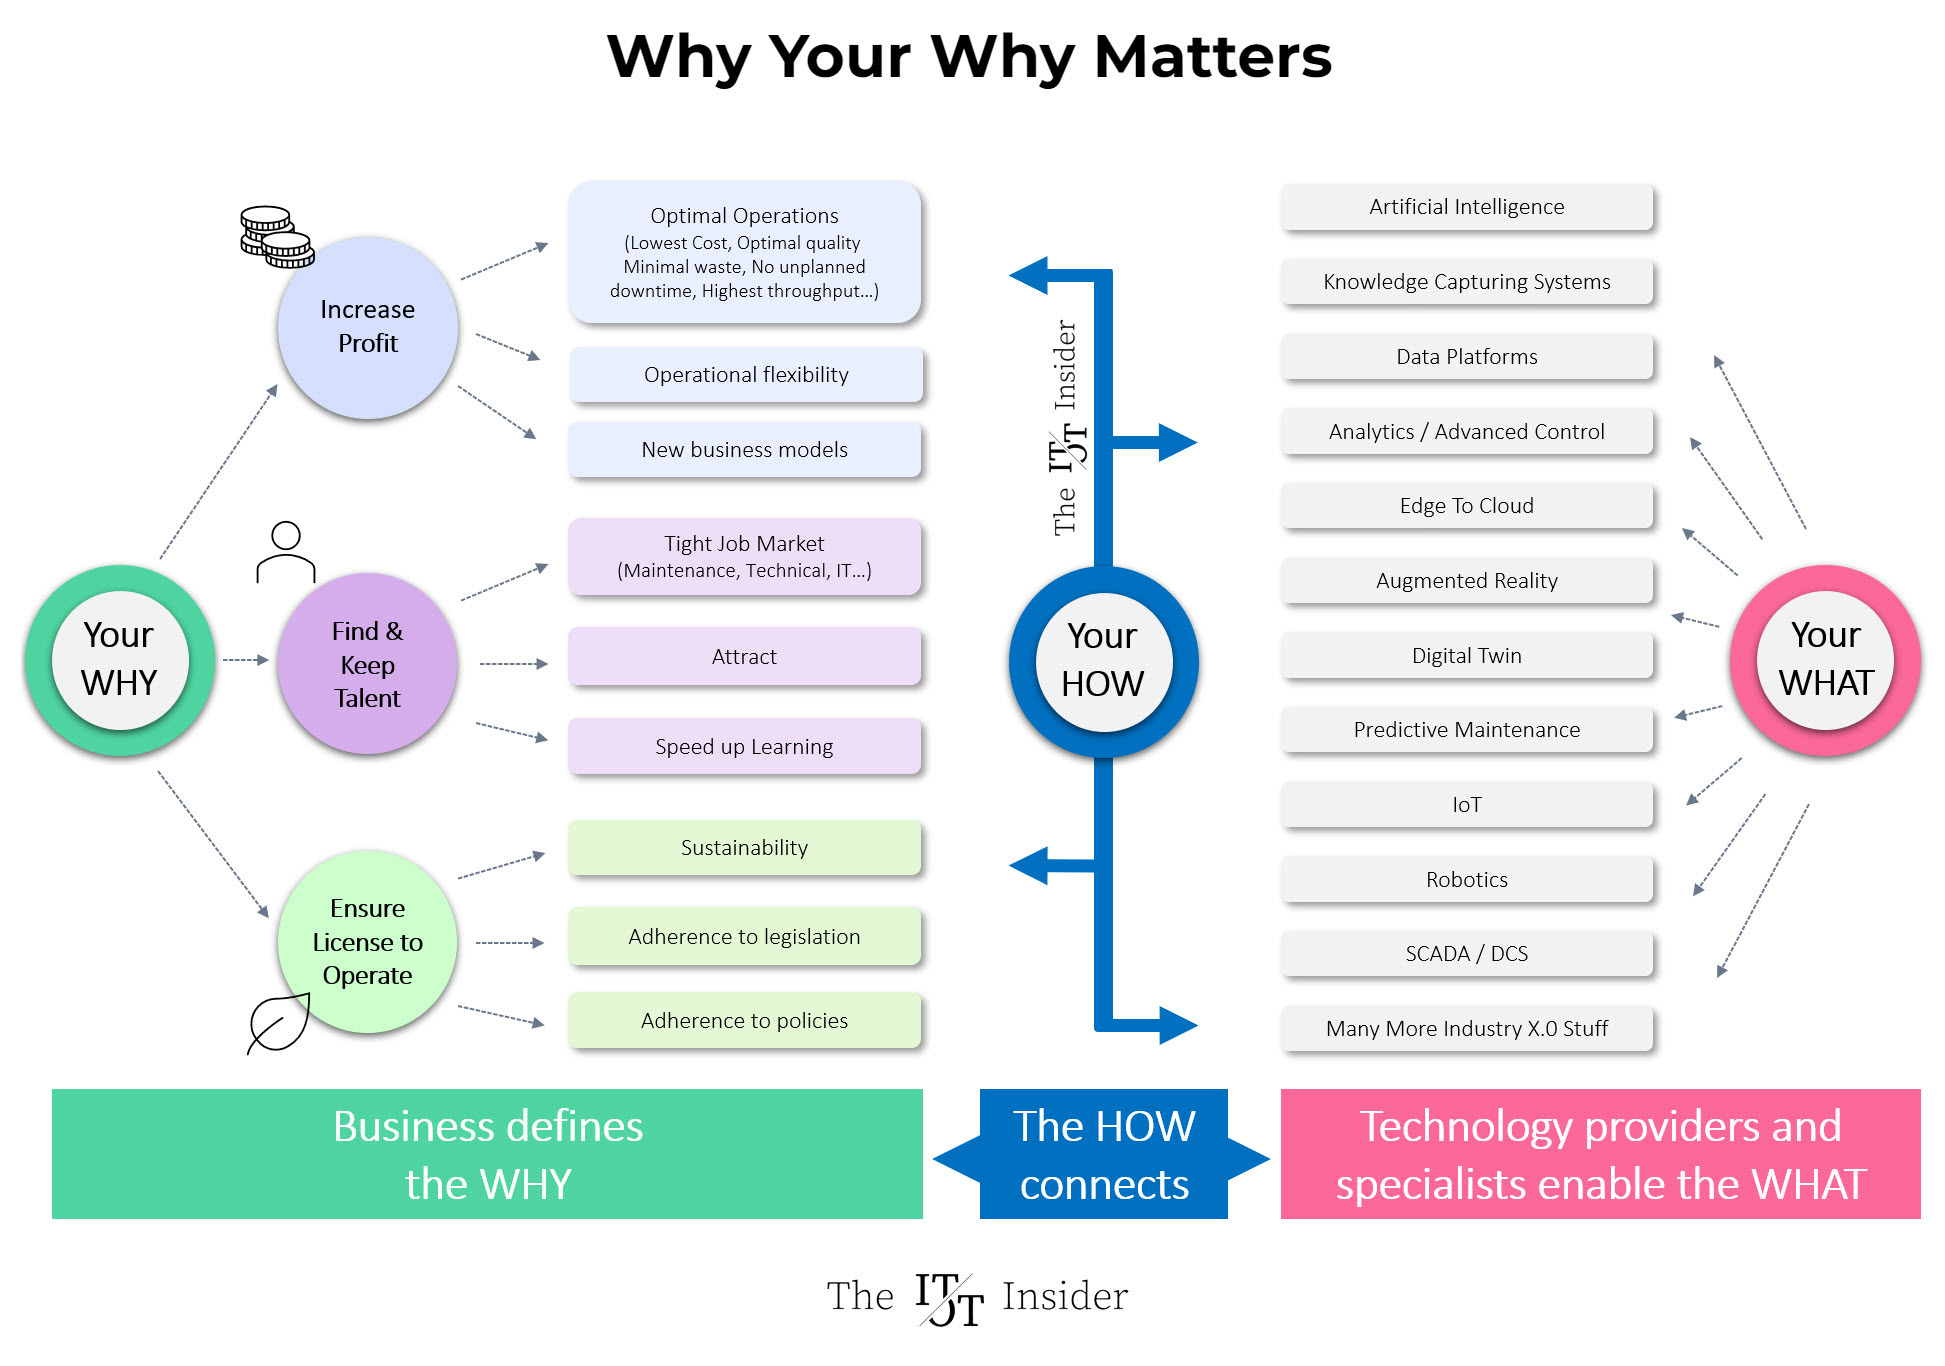 Why Your Why Matters - Source: IT/OT Insider